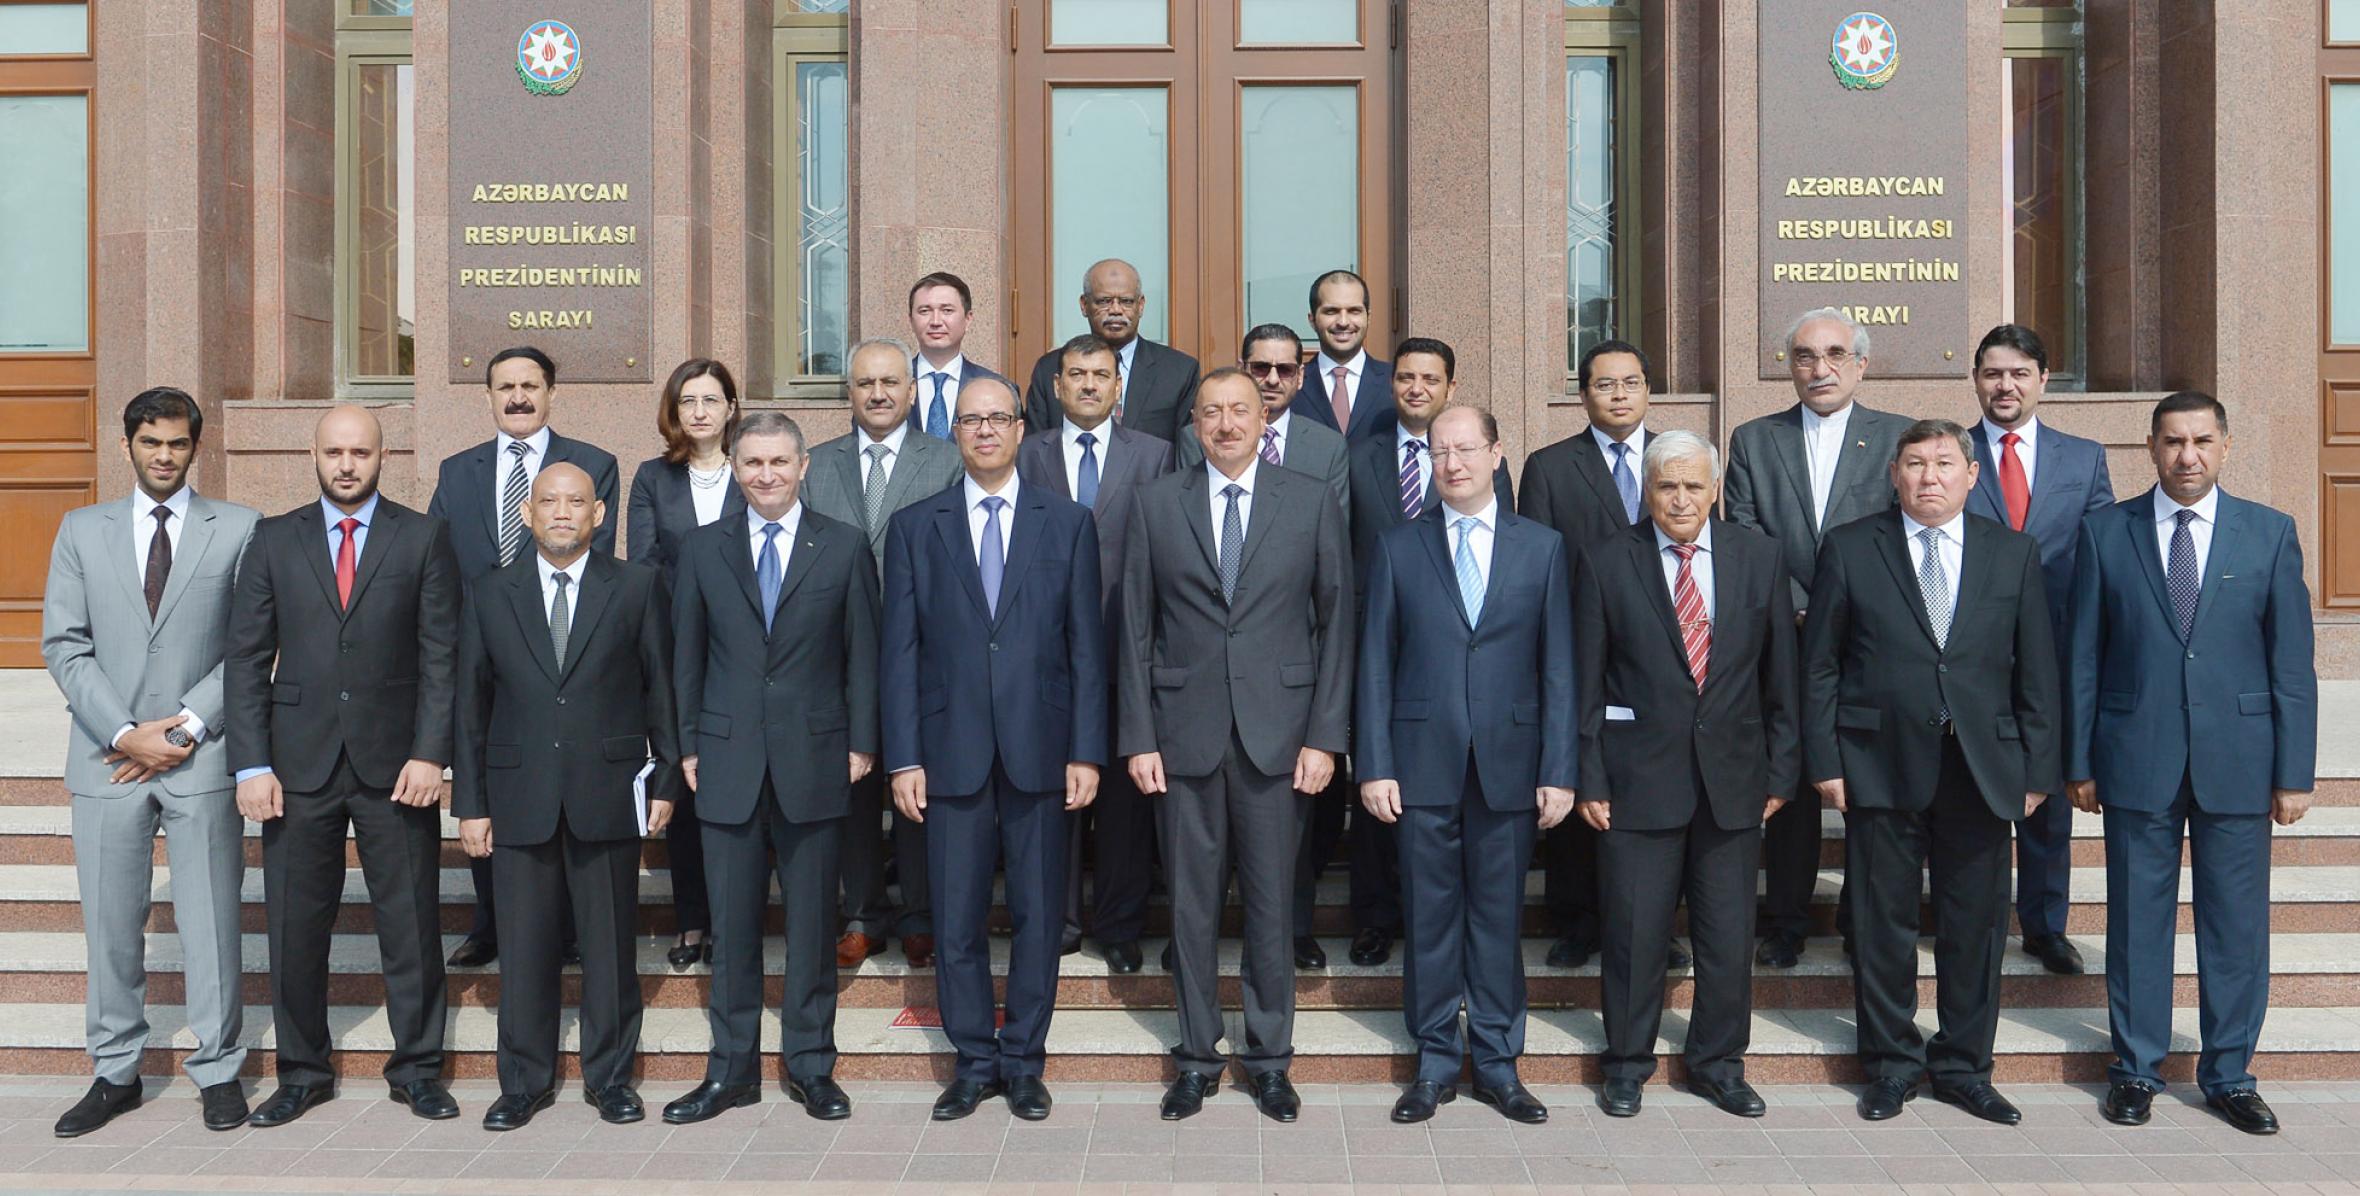 Ilham Aliyev received ambassadors and heads of diplomatic missions of Muslim countries in Azerbaijan on the occasion of the holy month of Ramadan